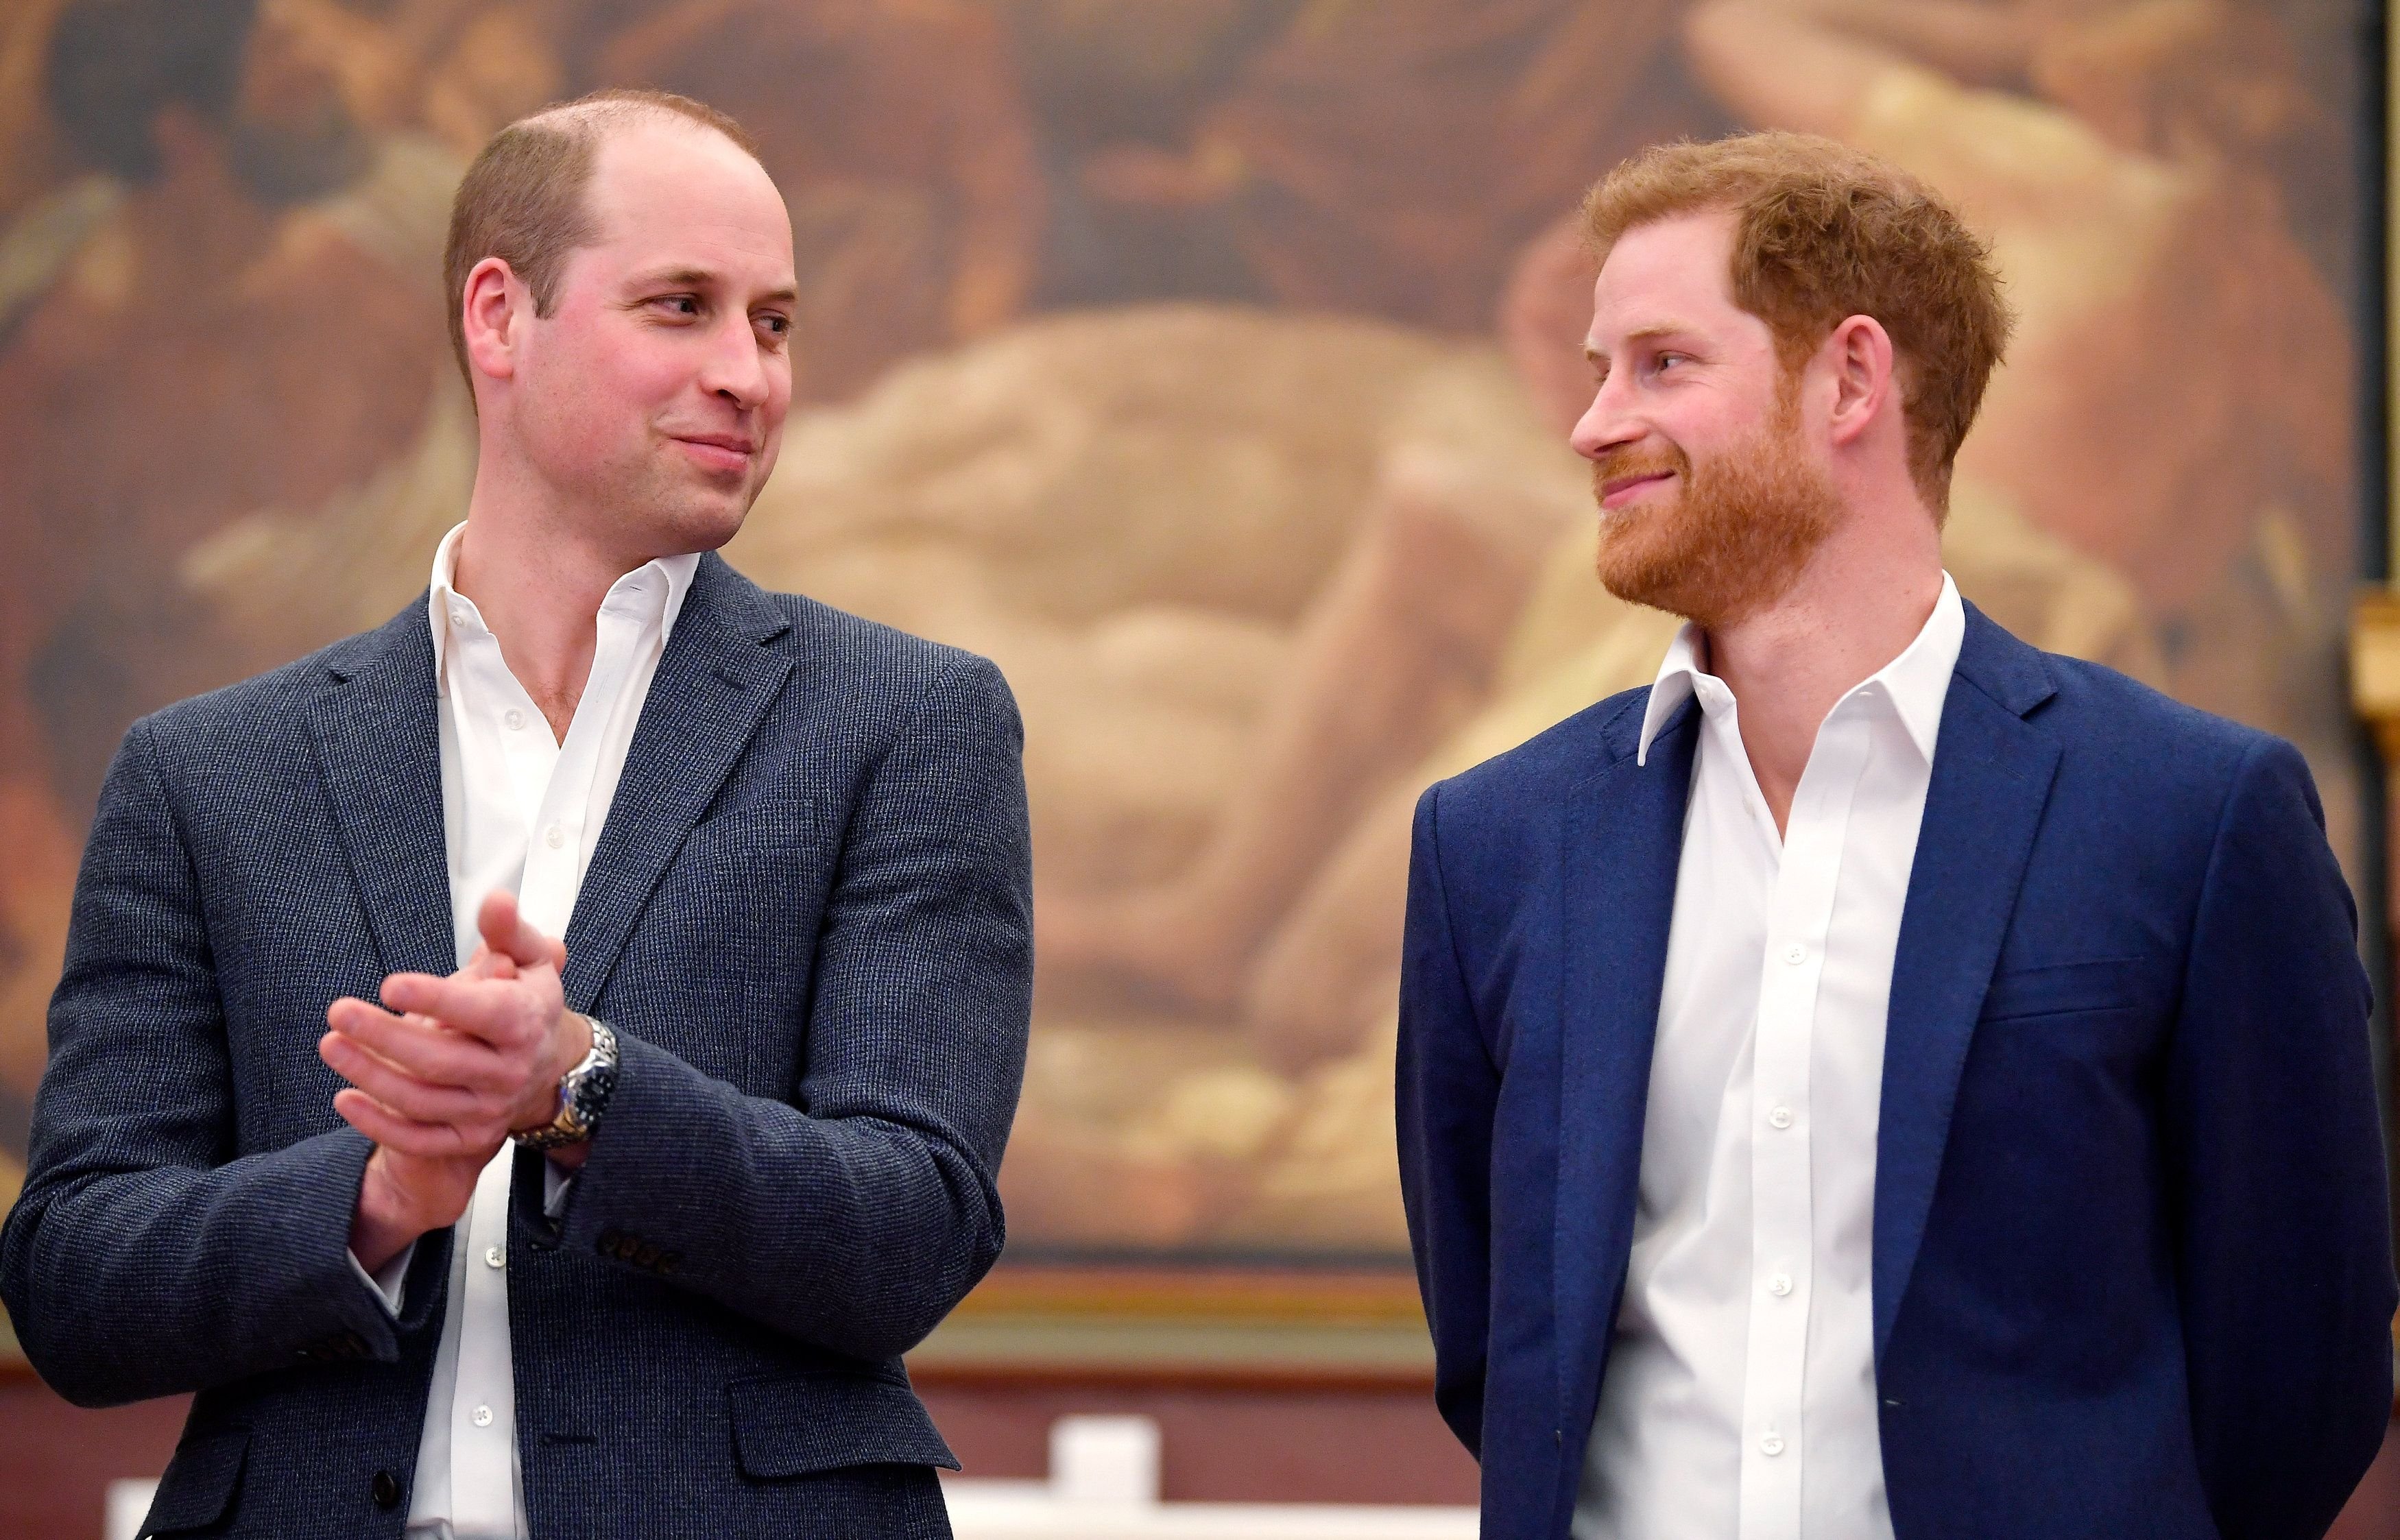 Prince William, Duke of Cambridge and Prince Harry at the opening of the Greenhouse Sports Centre on April 26, 2018 | Photo: Getty Images